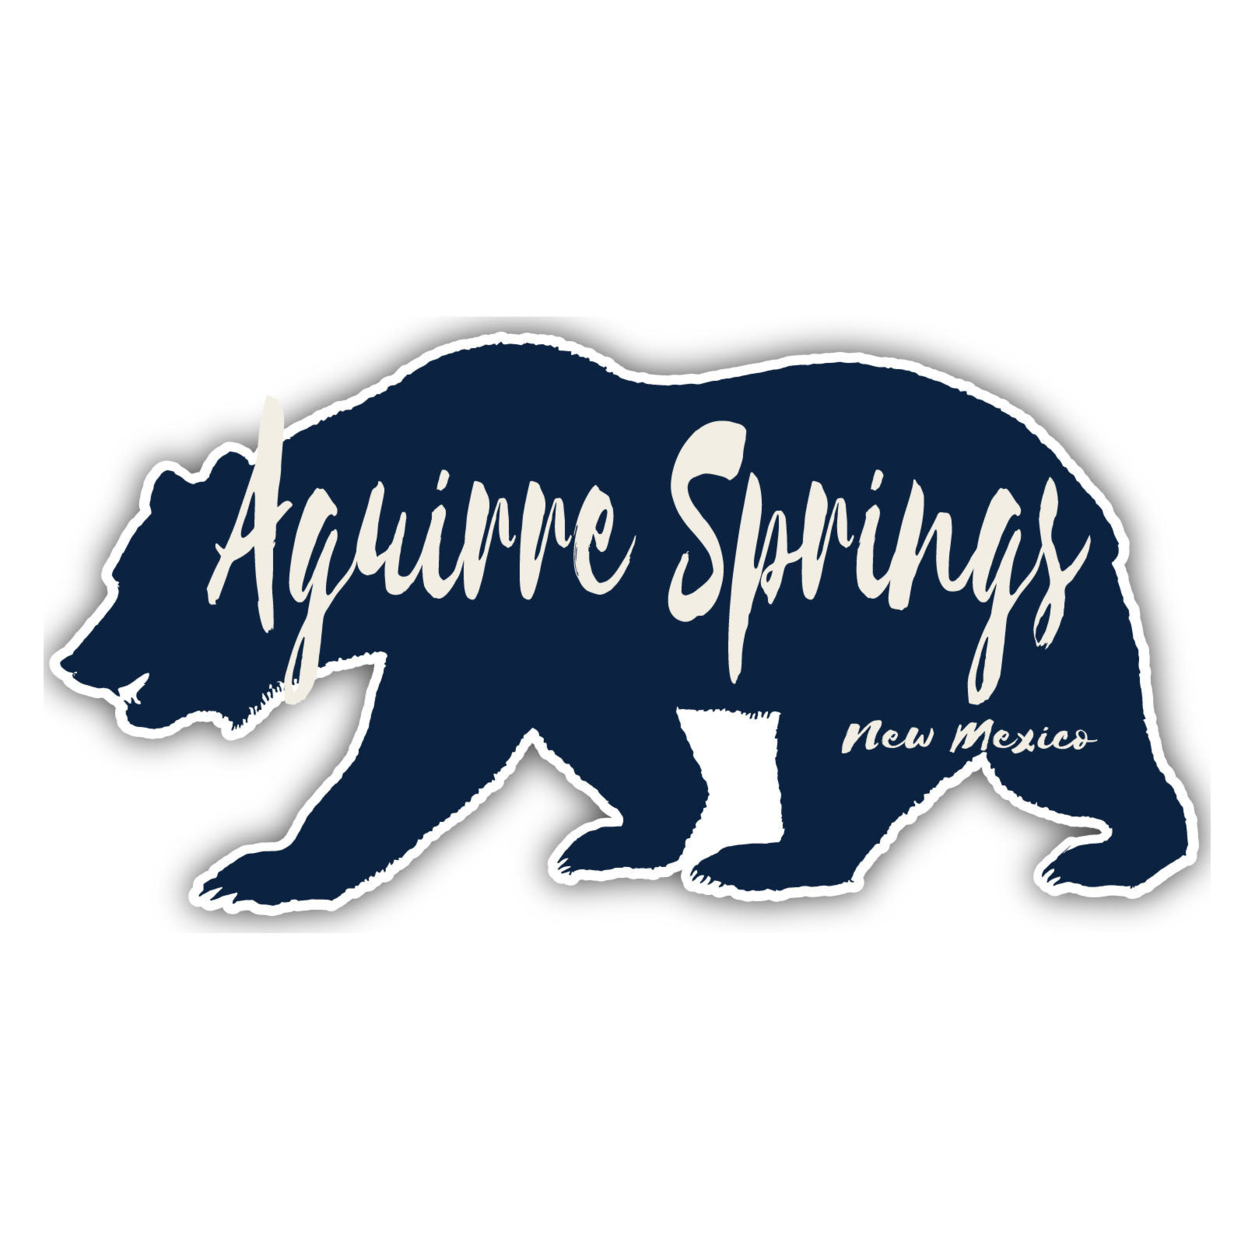 Aguirre Springs New Mexico Souvenir Decorative Stickers (Choose Theme And Size) - Single Unit, 4-Inch, Bear